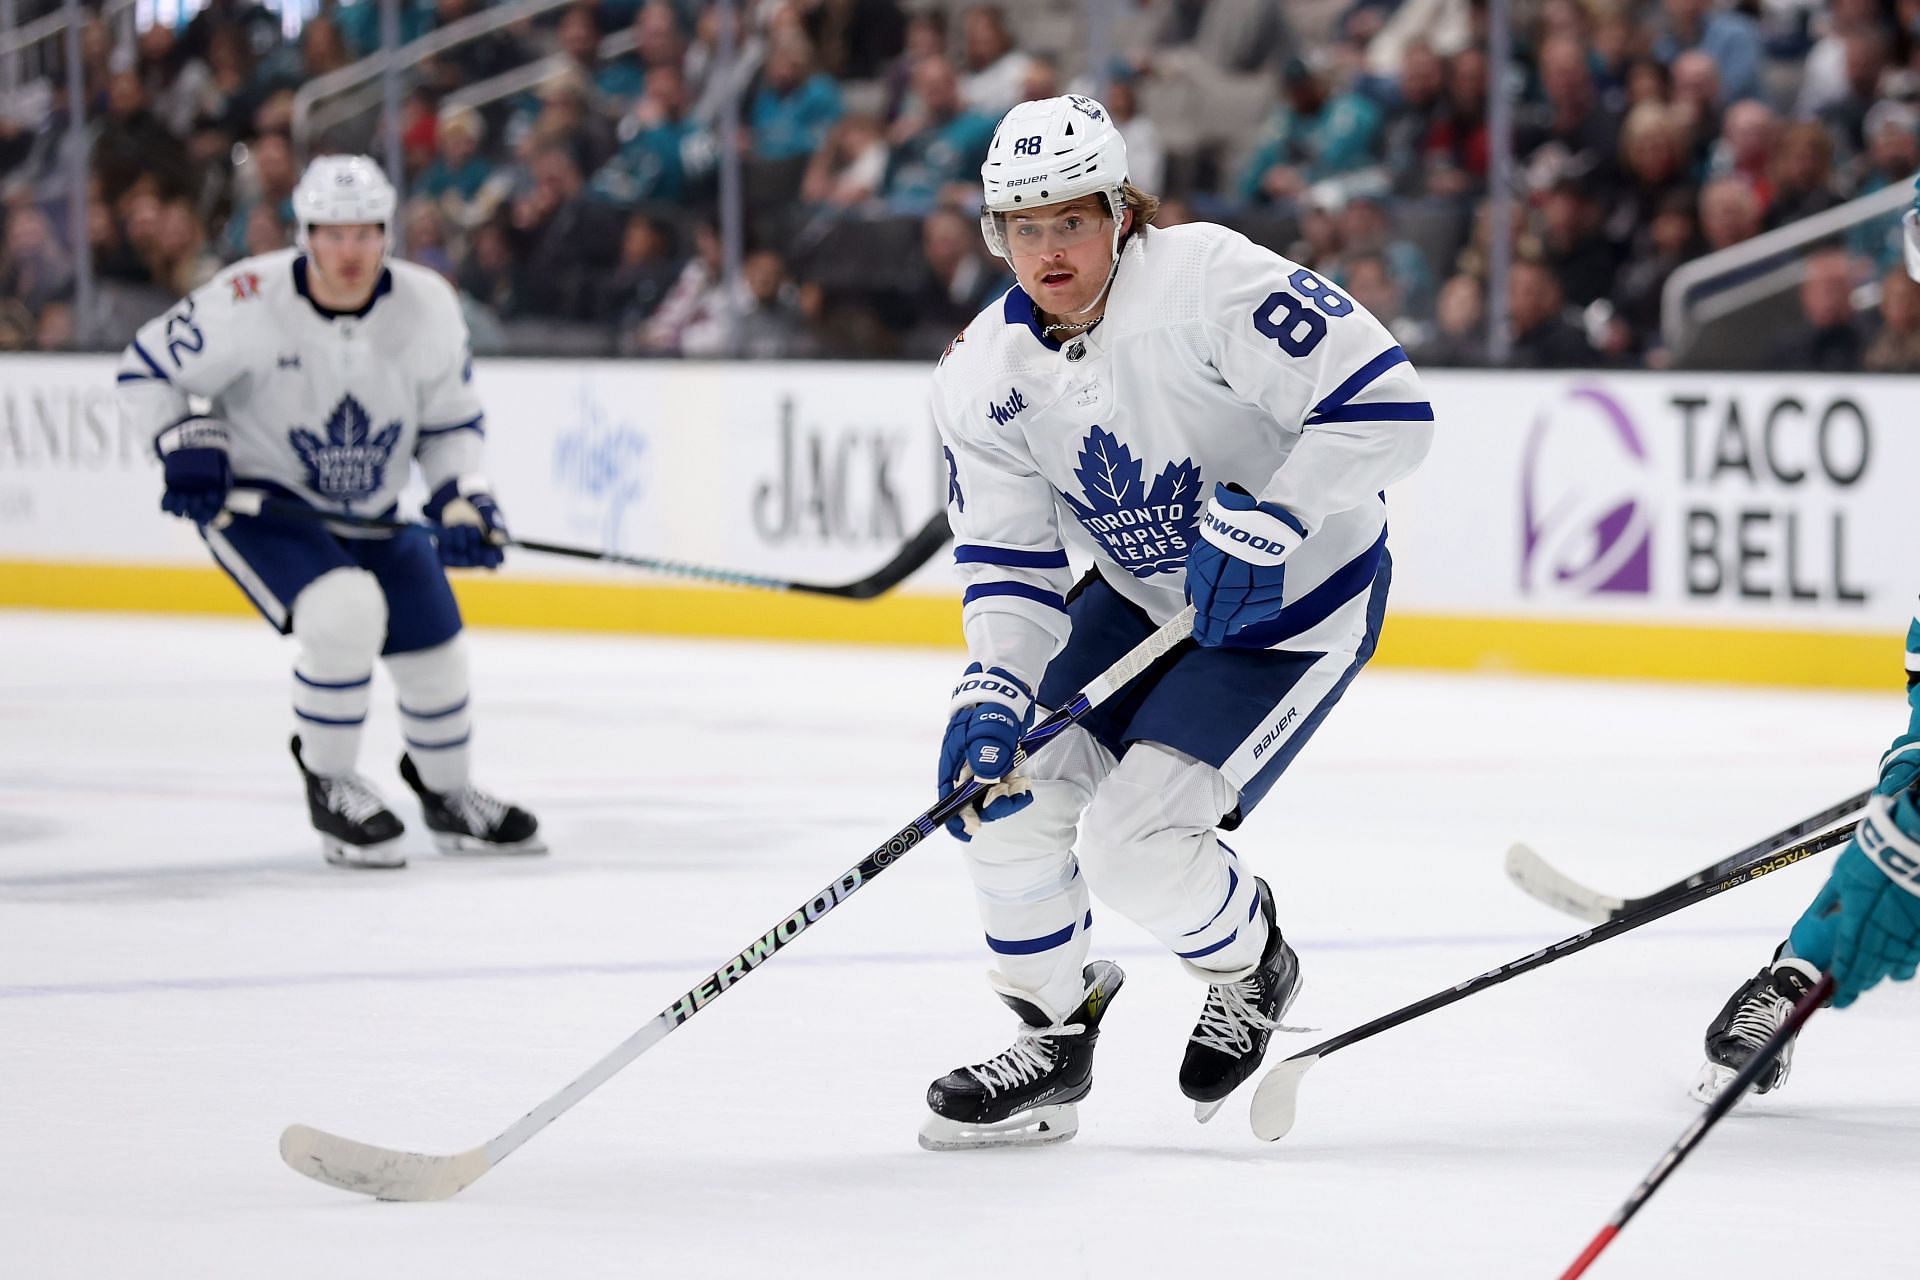 William Nylander opens up after signing recordbreaking 92 million